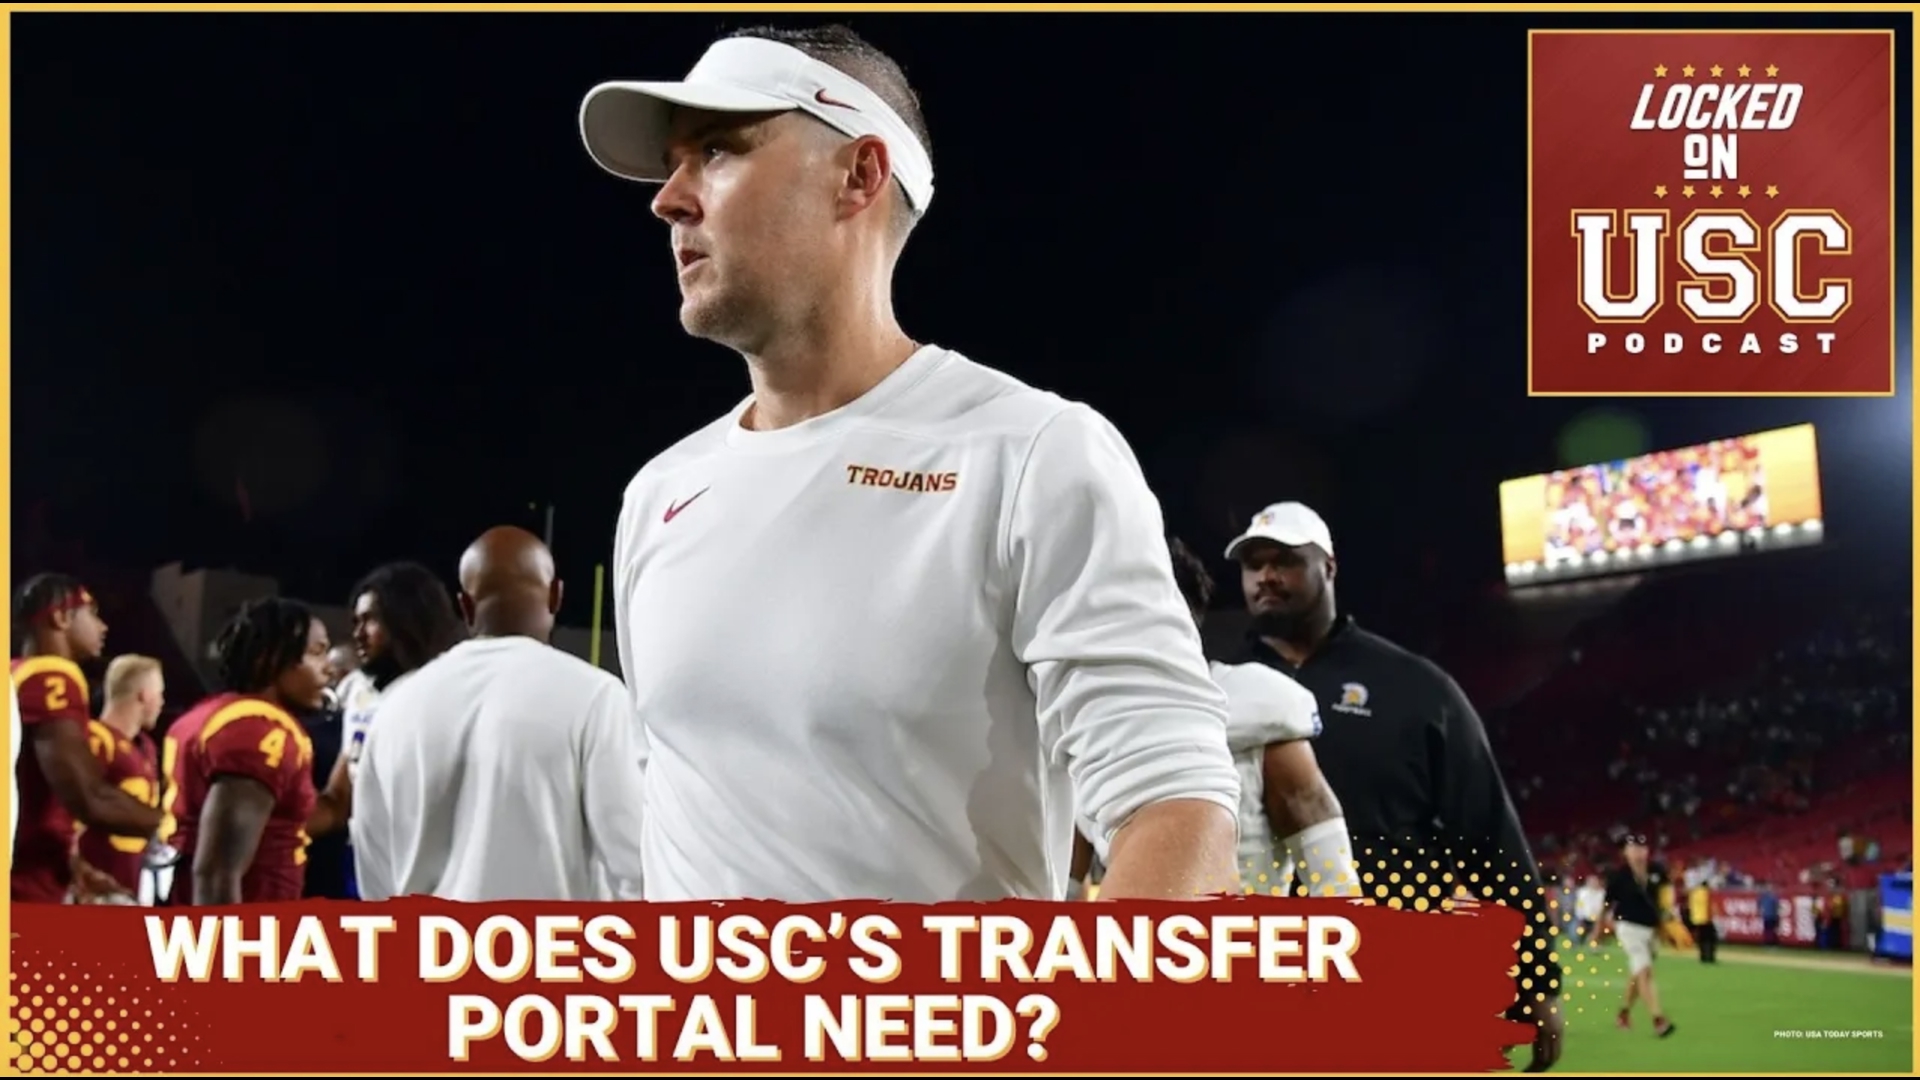 USC has some very specific transfer portal needs. But what does USC need to do differently to secure those guys from the transfer portal?